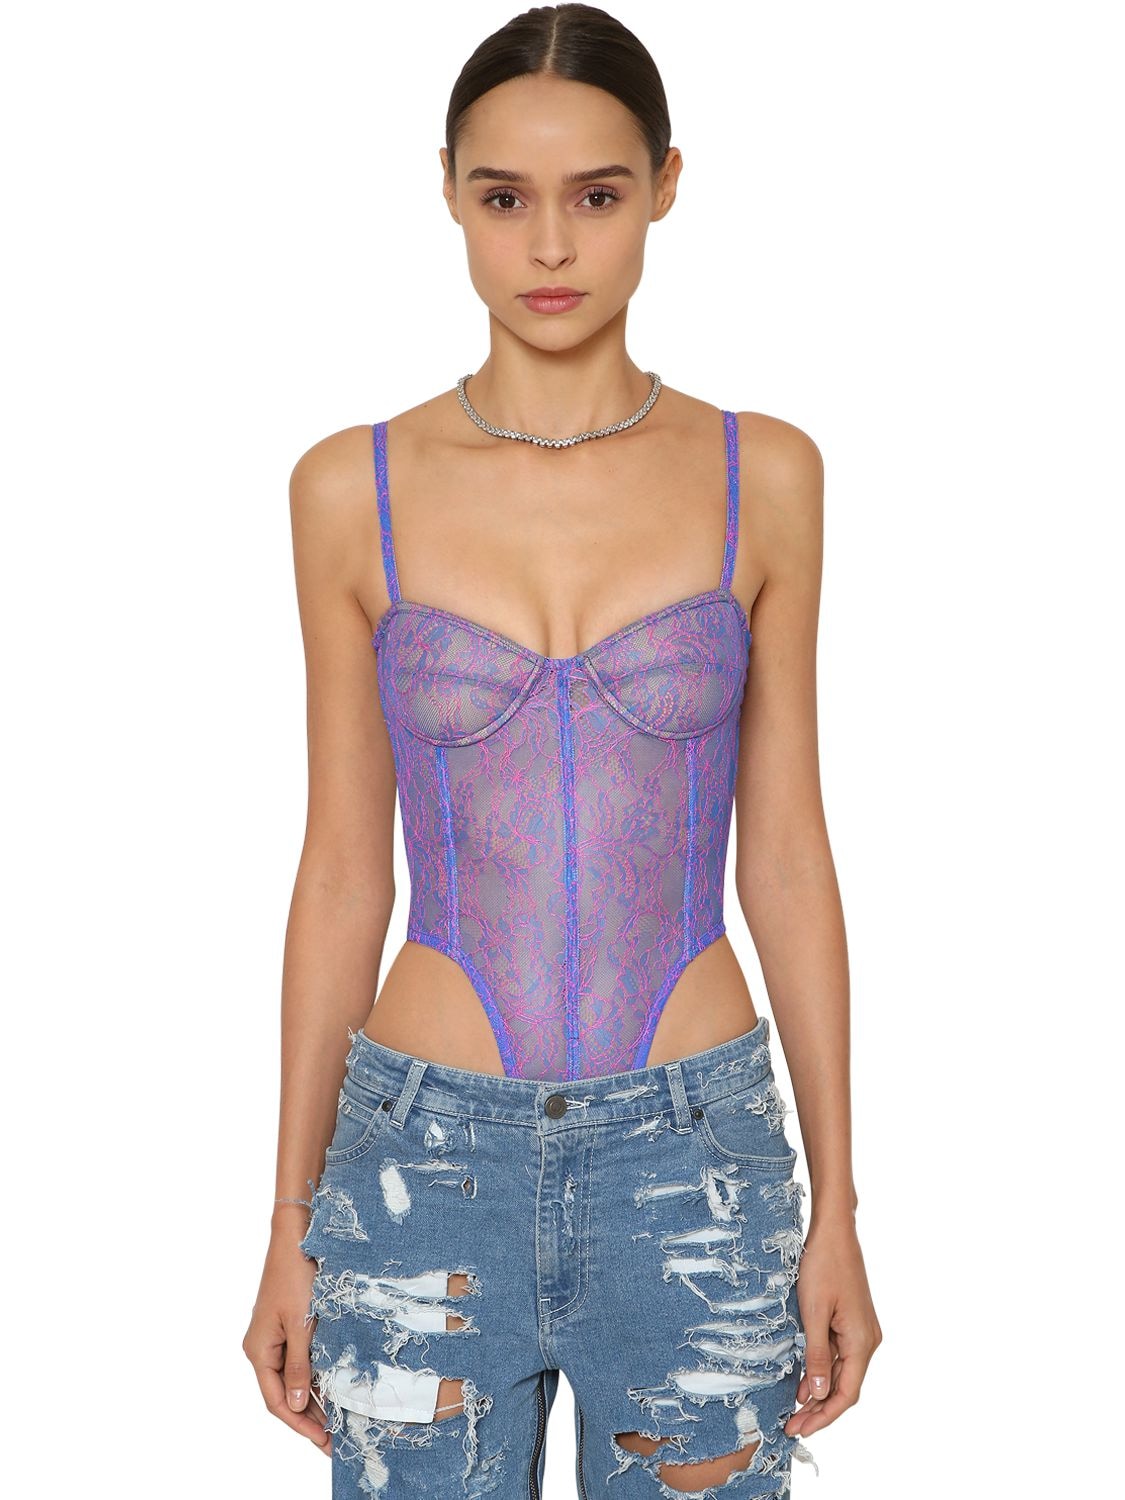 Laquan Smith High Waist Lace Bustier Bodysuit In Lilac